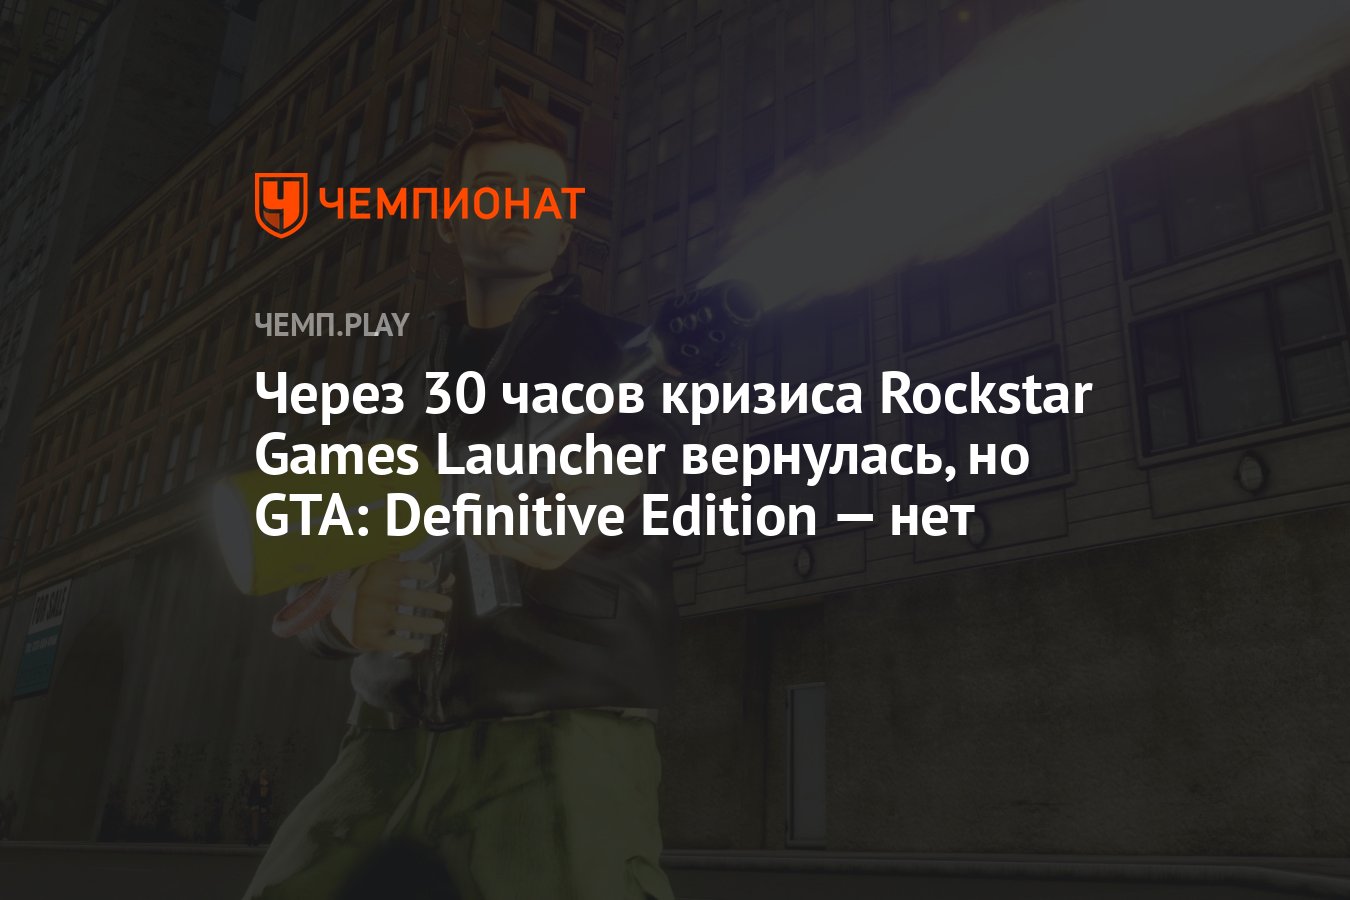 Could not launch game